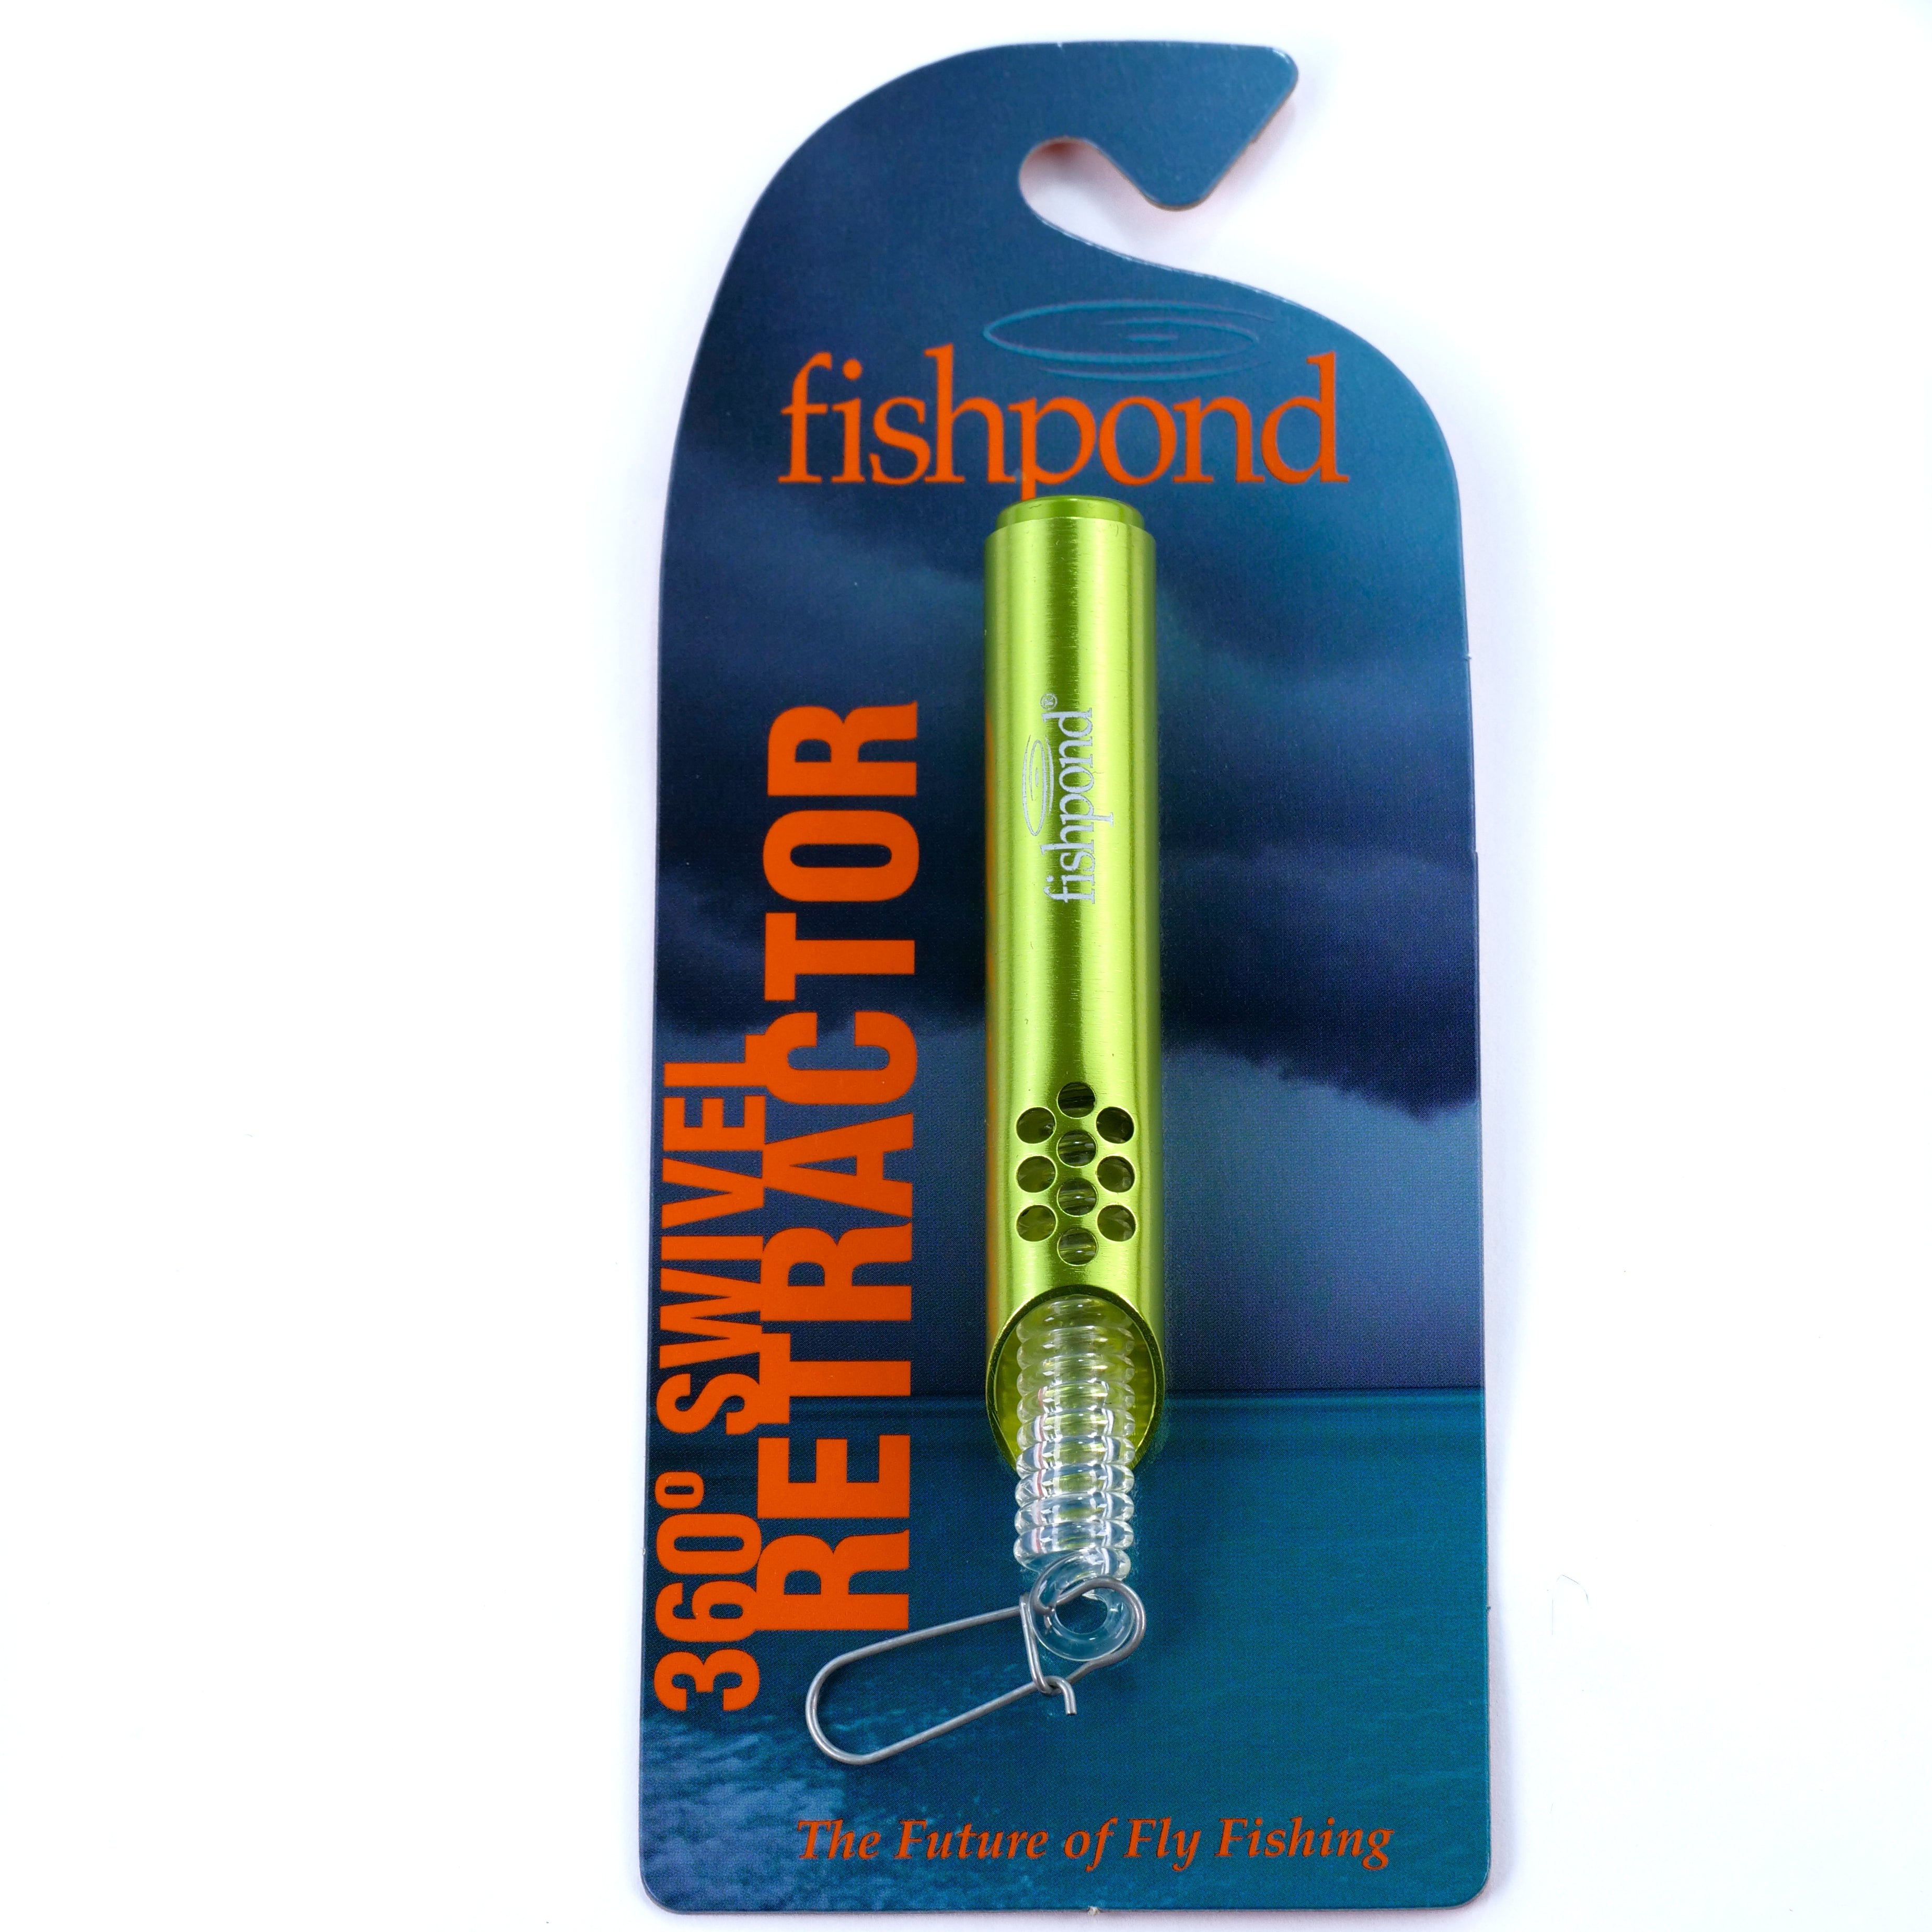 Fishpond 360 Degree Swivel Retractor – Tactical Fly Fisher